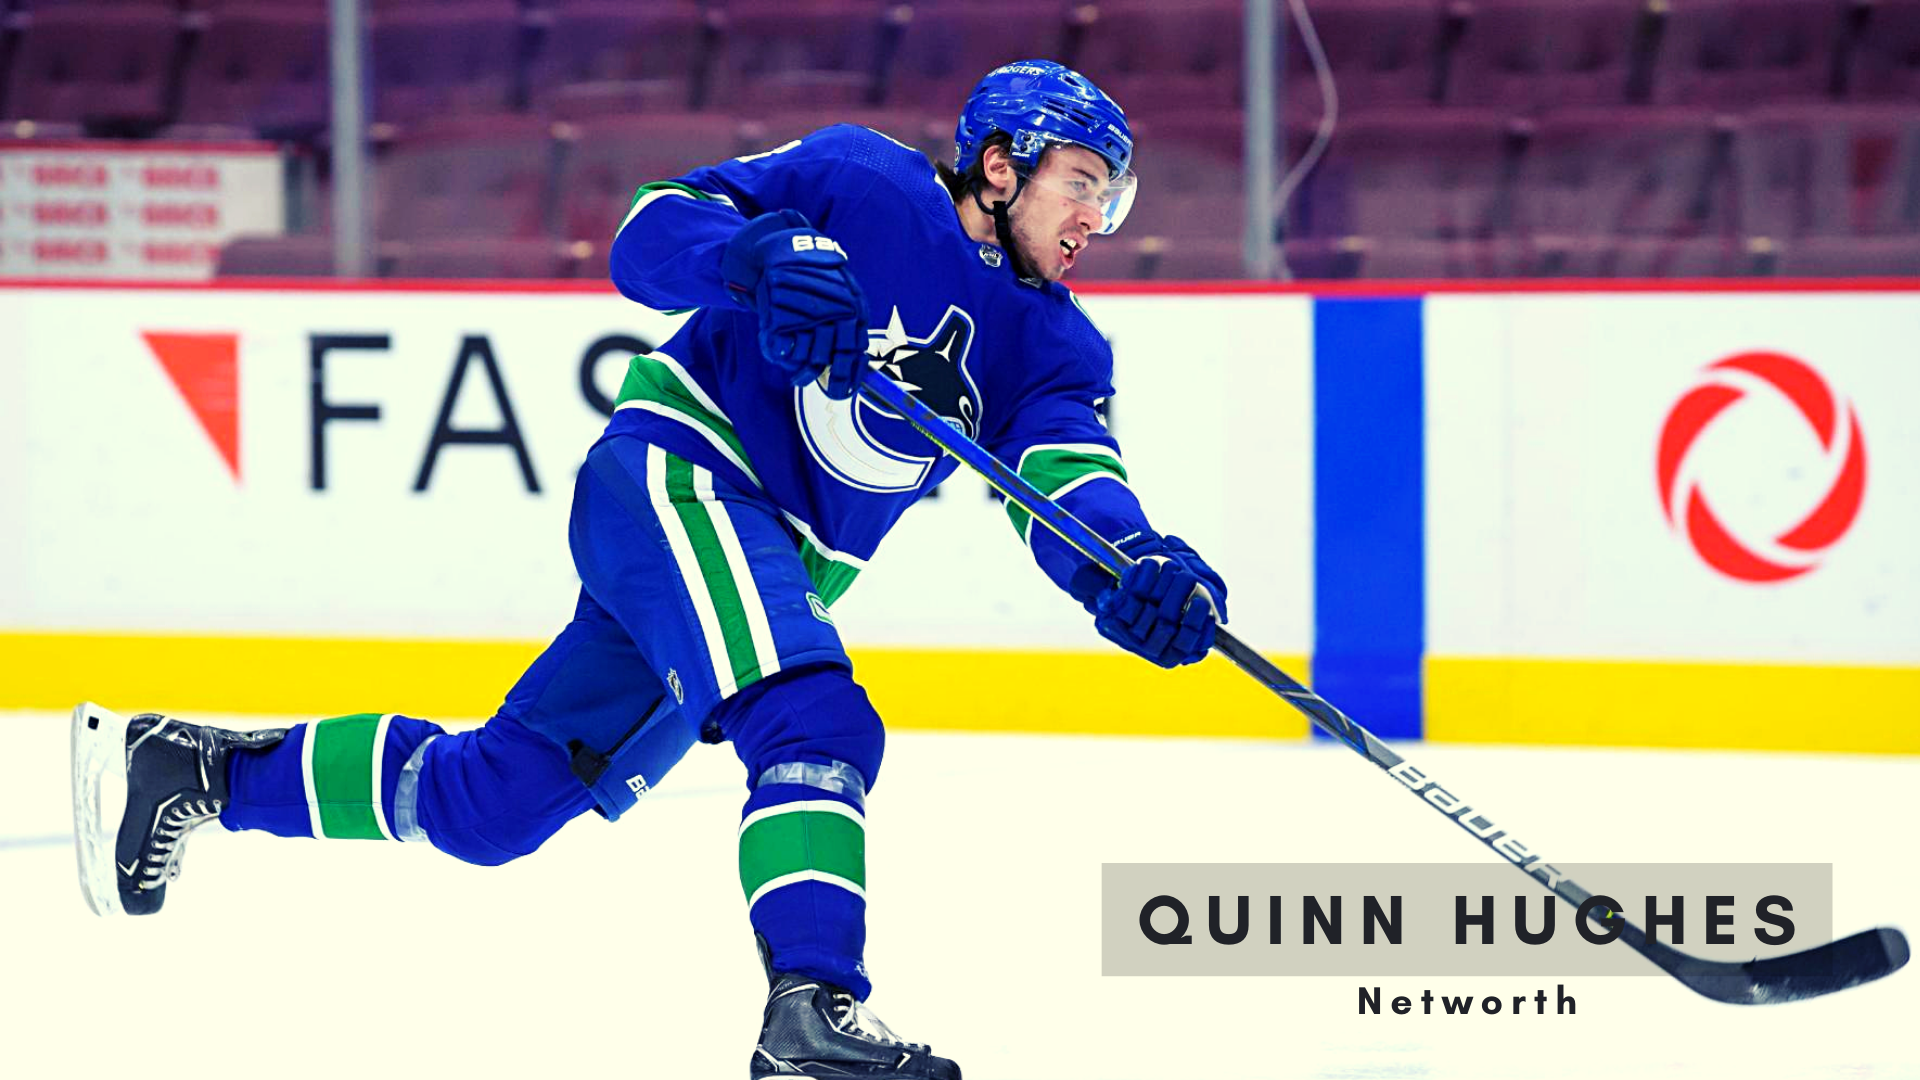 Quinn Hughes 2023 Net Worth, Contract Details, Salary and Bio